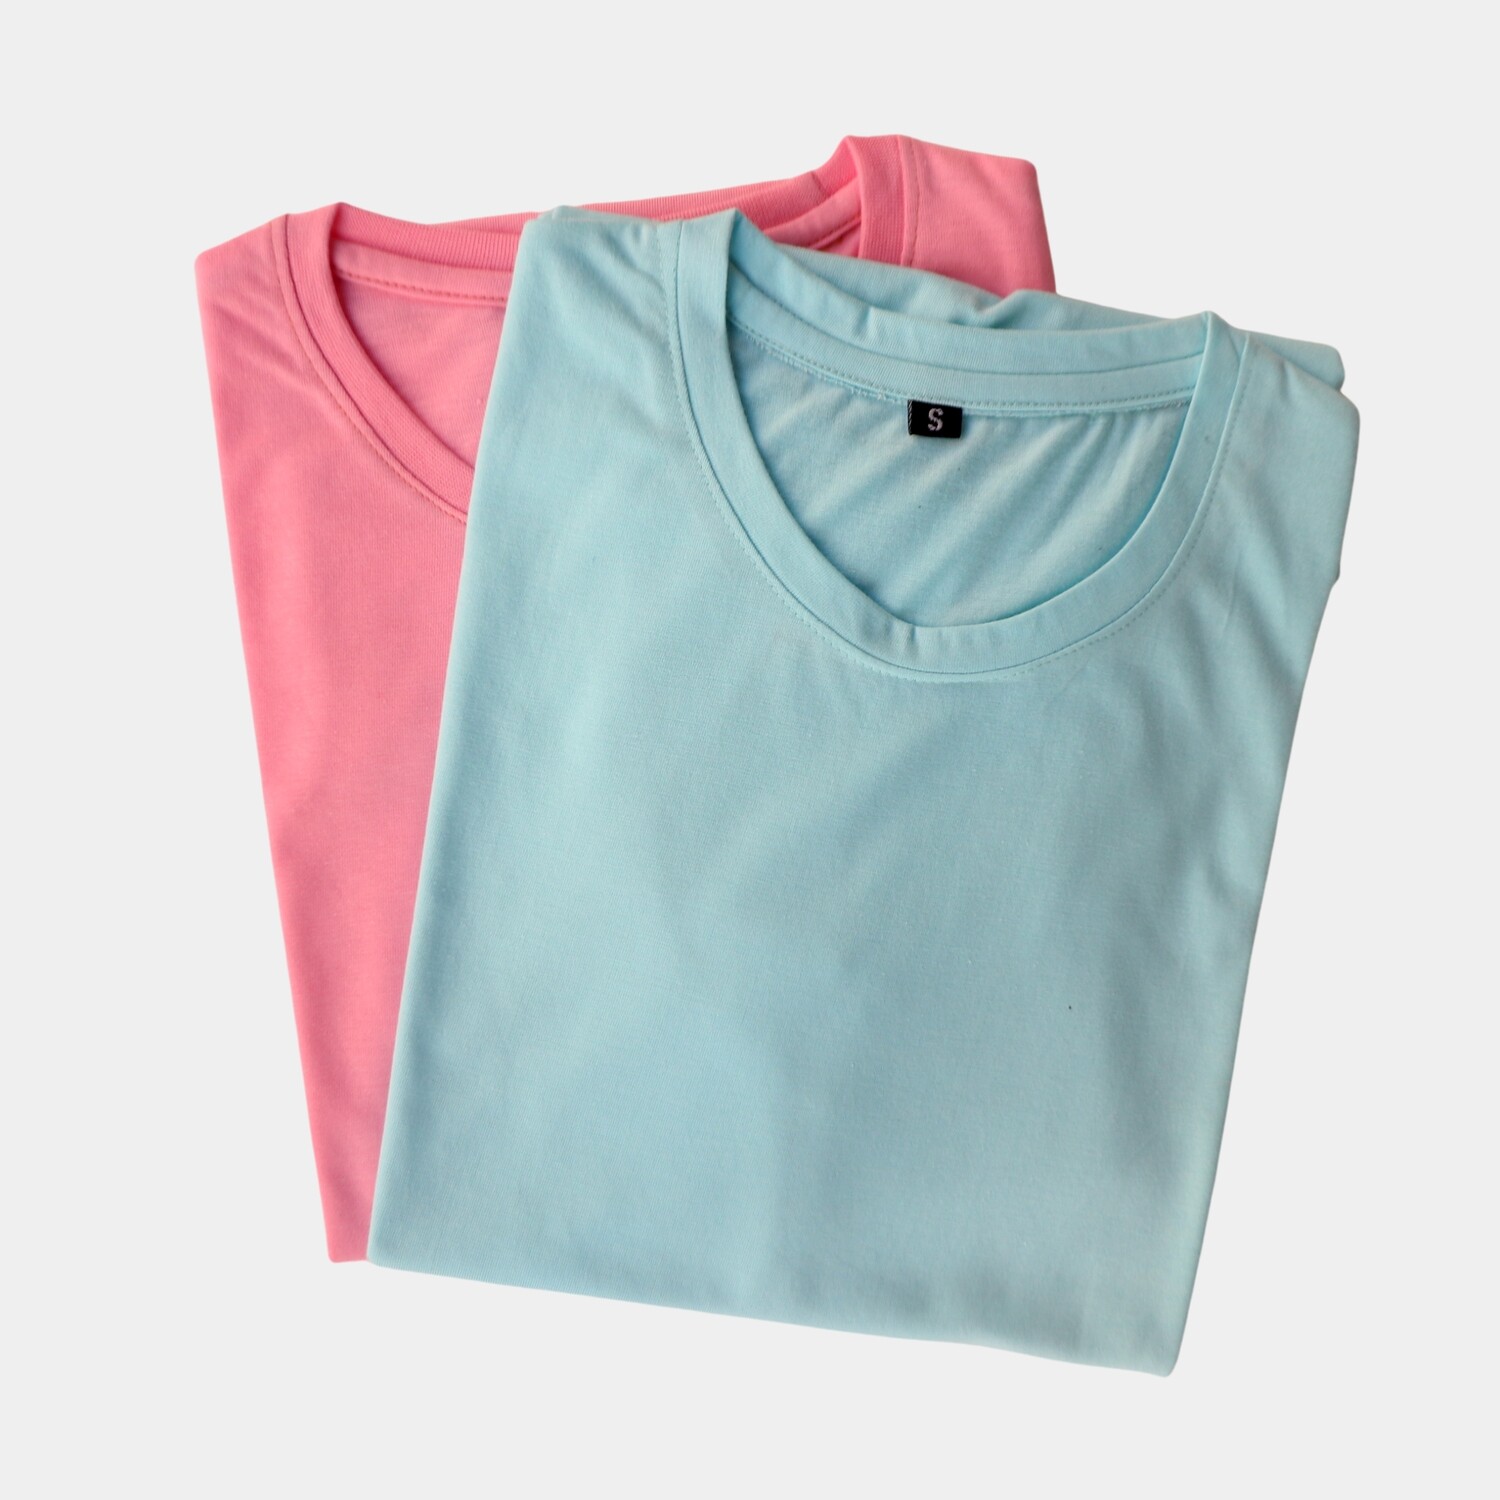 Unisex T-shirts (pack of 2) - Pink, Sky blue